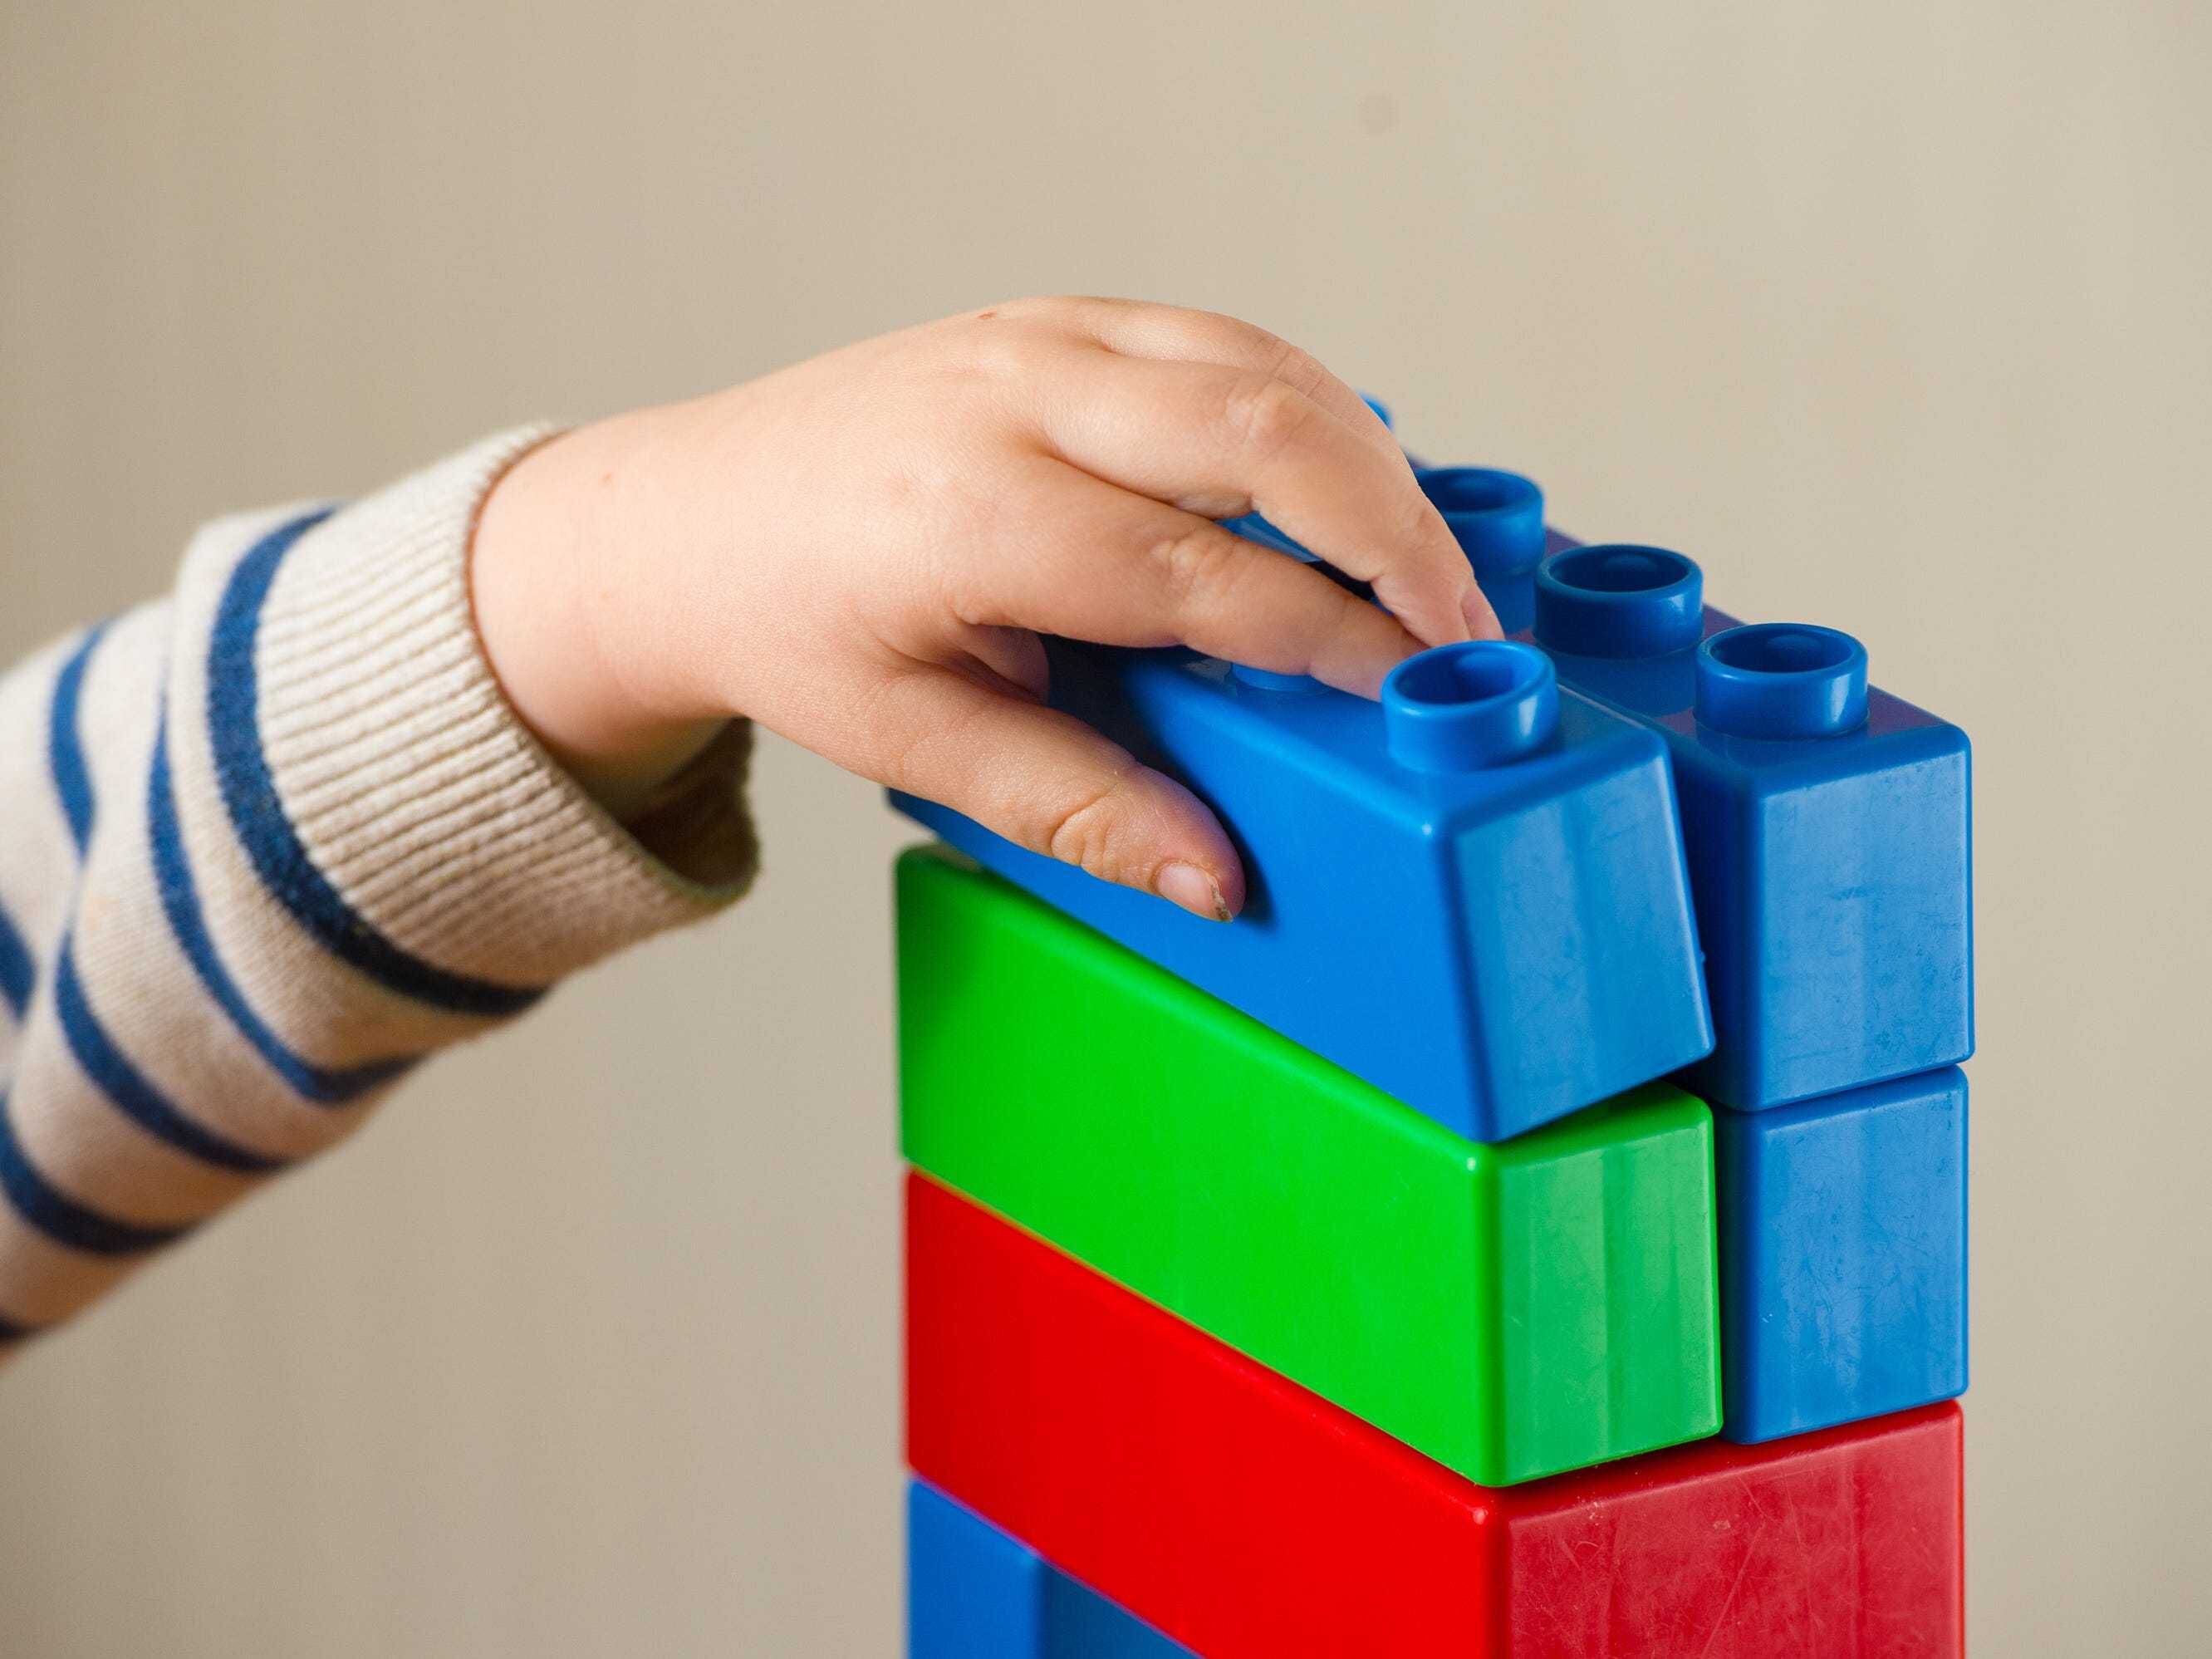 Expansion of funded childcare could ‘jeopardise’ quality of provision – watchdog